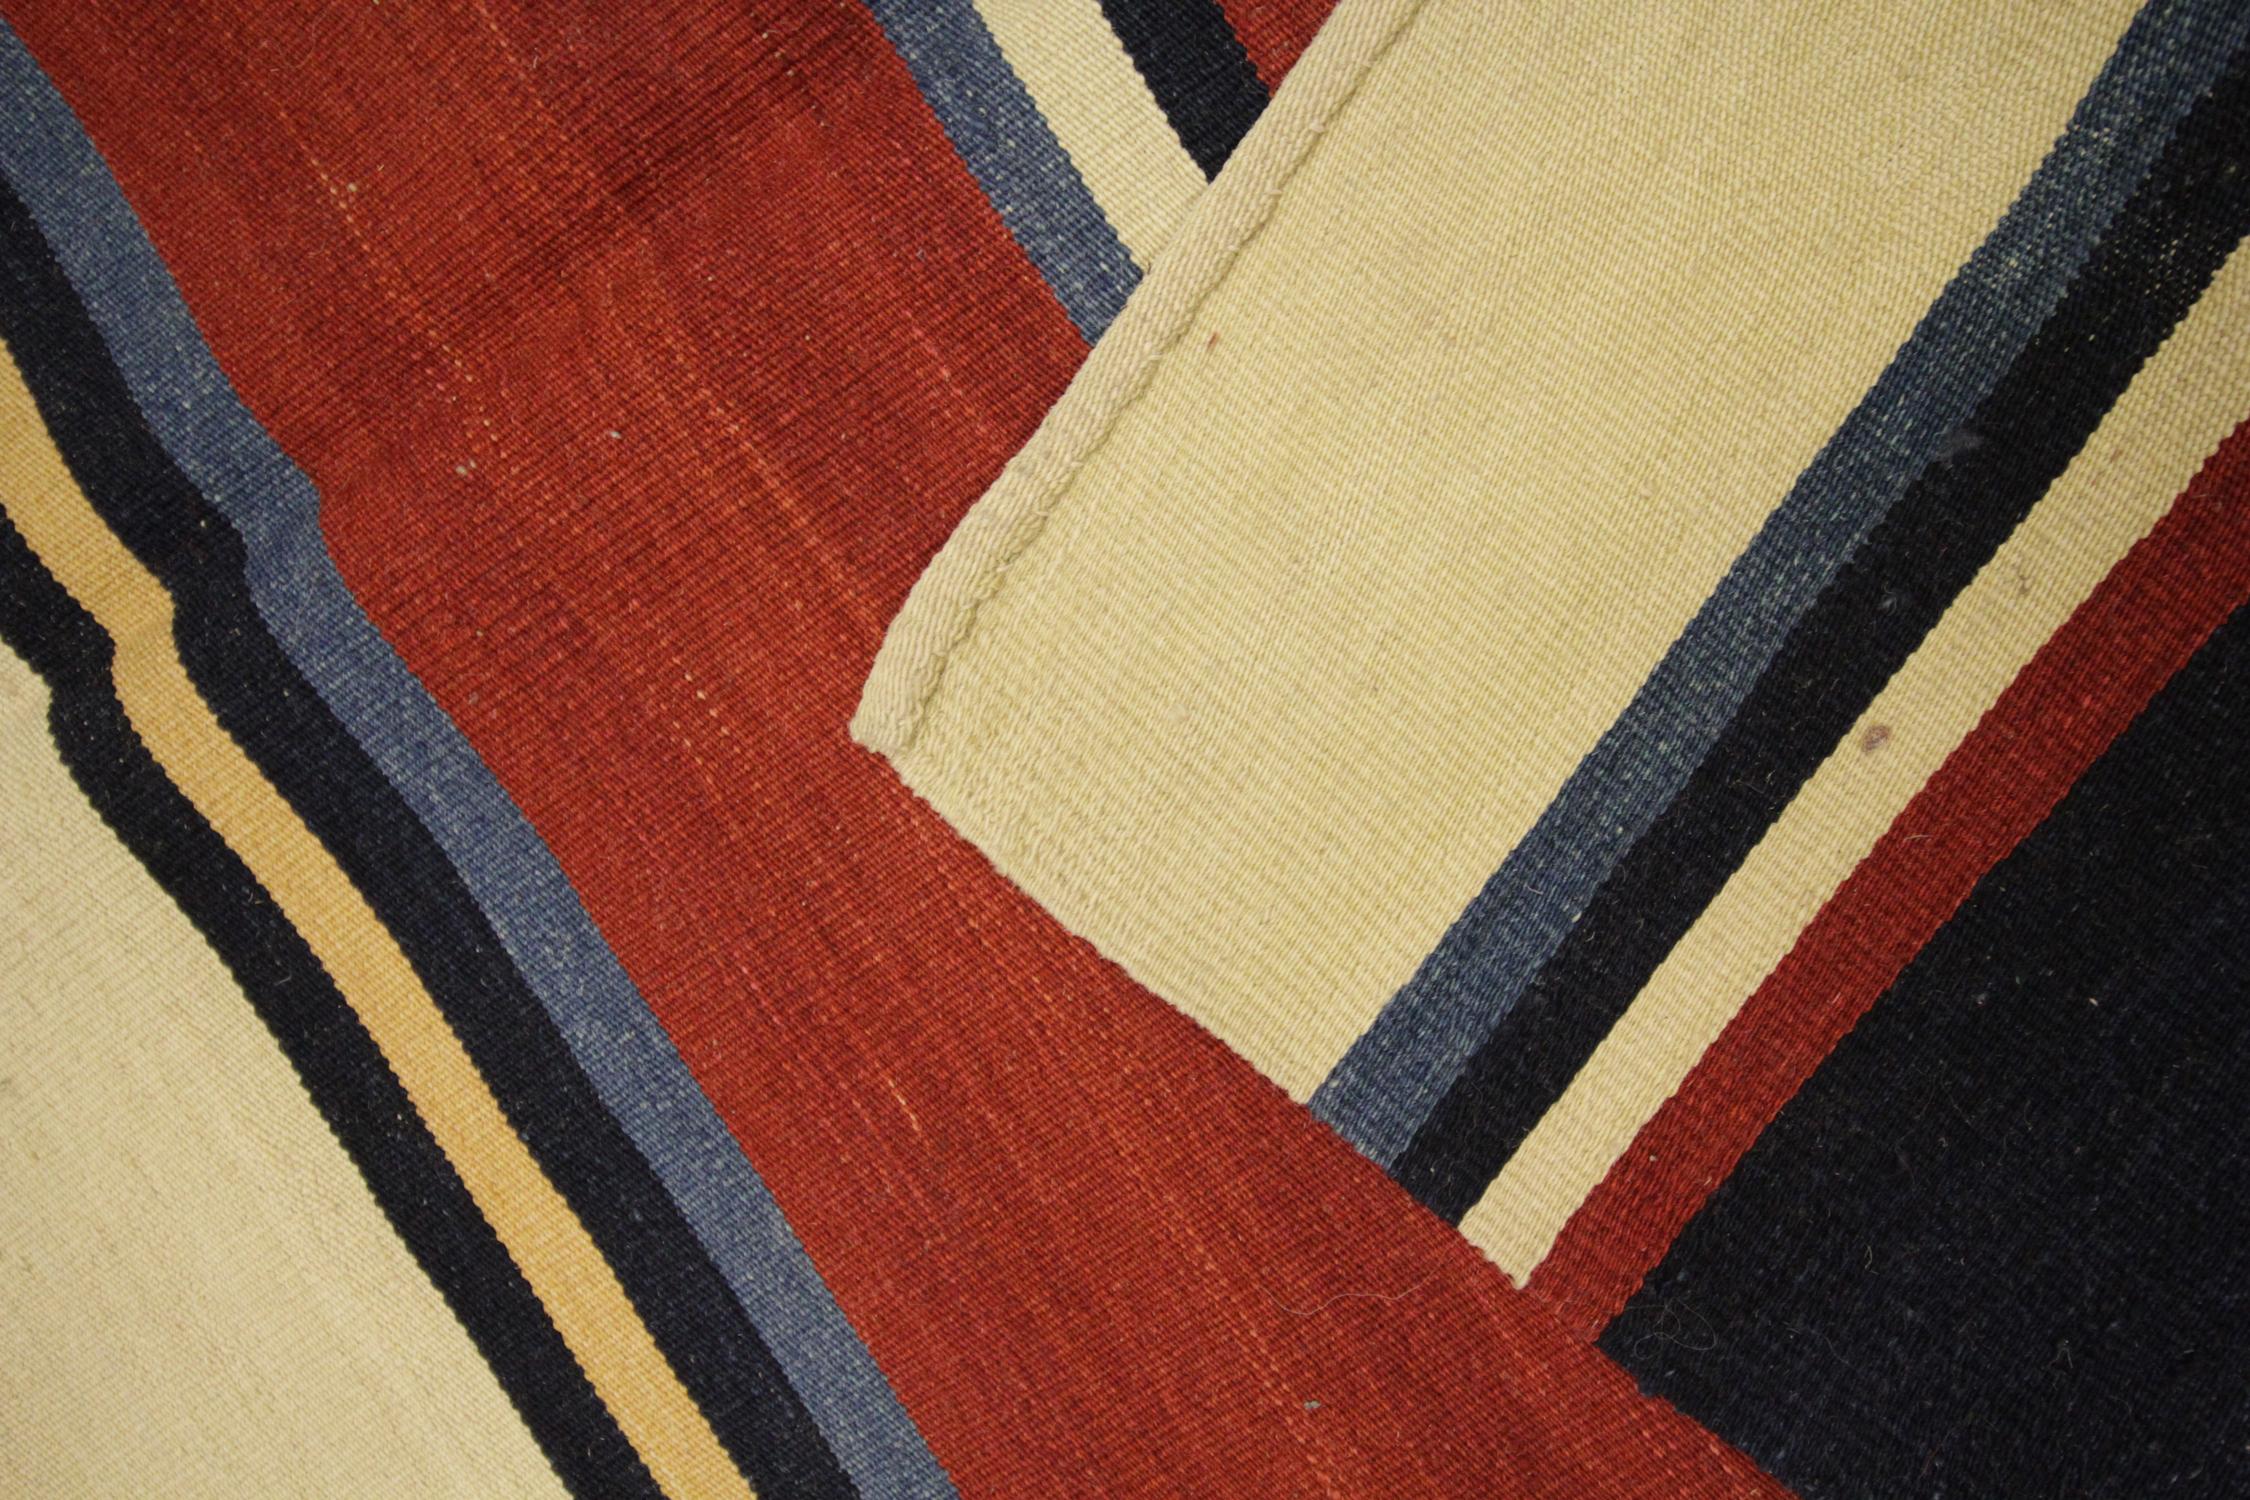 Hand-Knotted Modern Striped Kilims Rug Blue Red Kilim Rugs Wool Flat-Weave Carpet For Sale